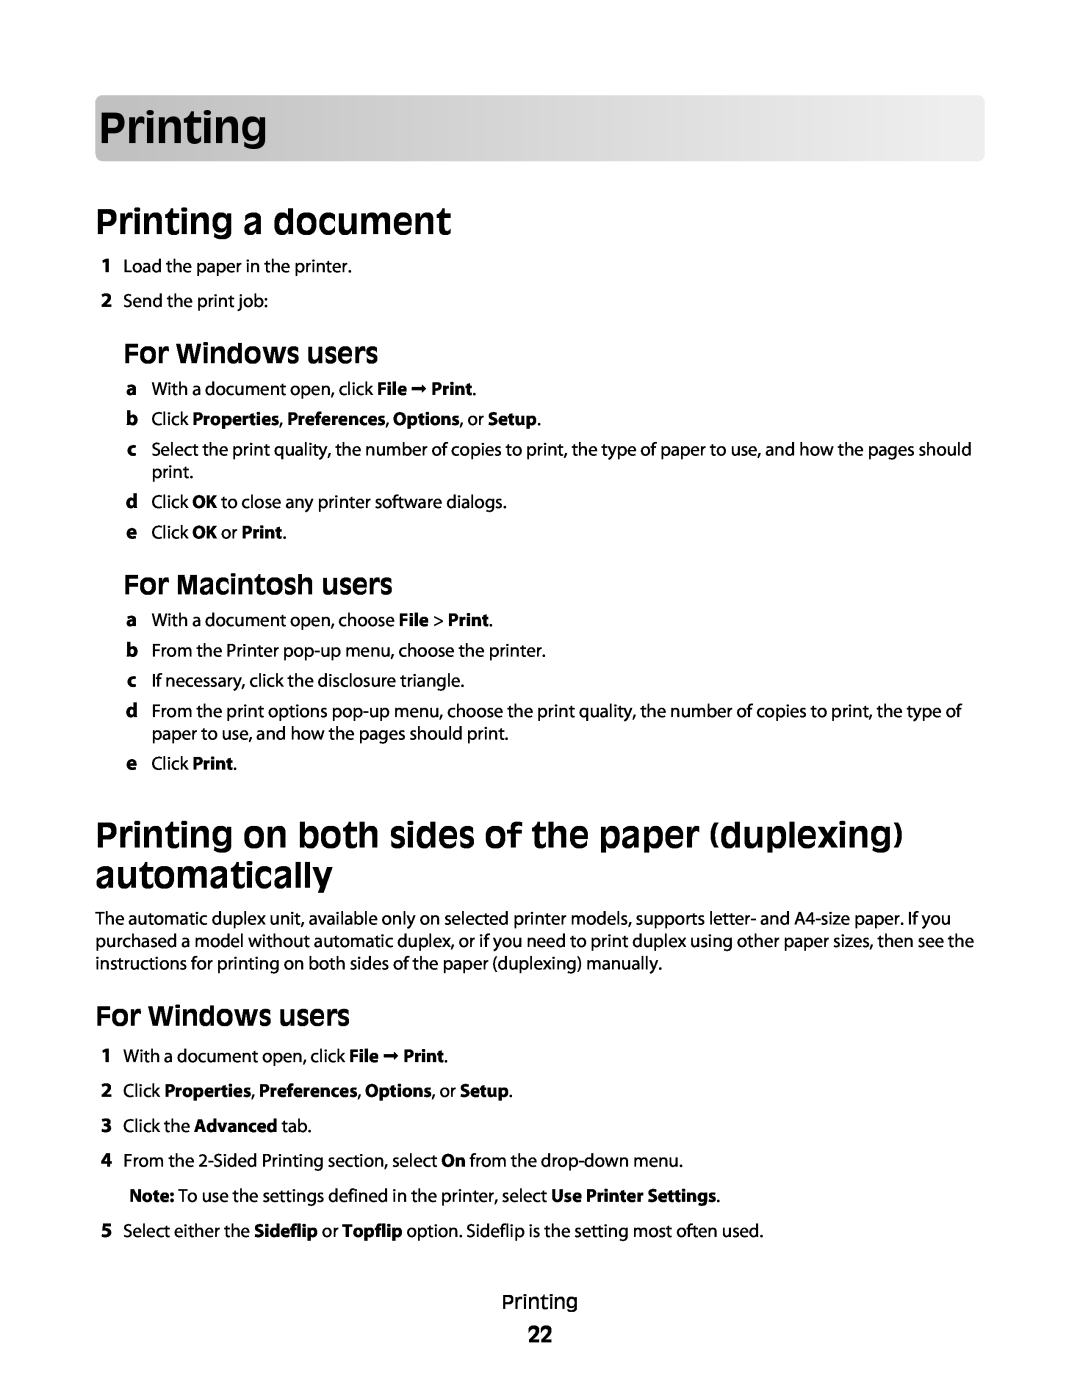 Lexmark Pro205, Pro208, Pro207 manual Printing a document, bClick Properties, Preferences, Options, or Setup 